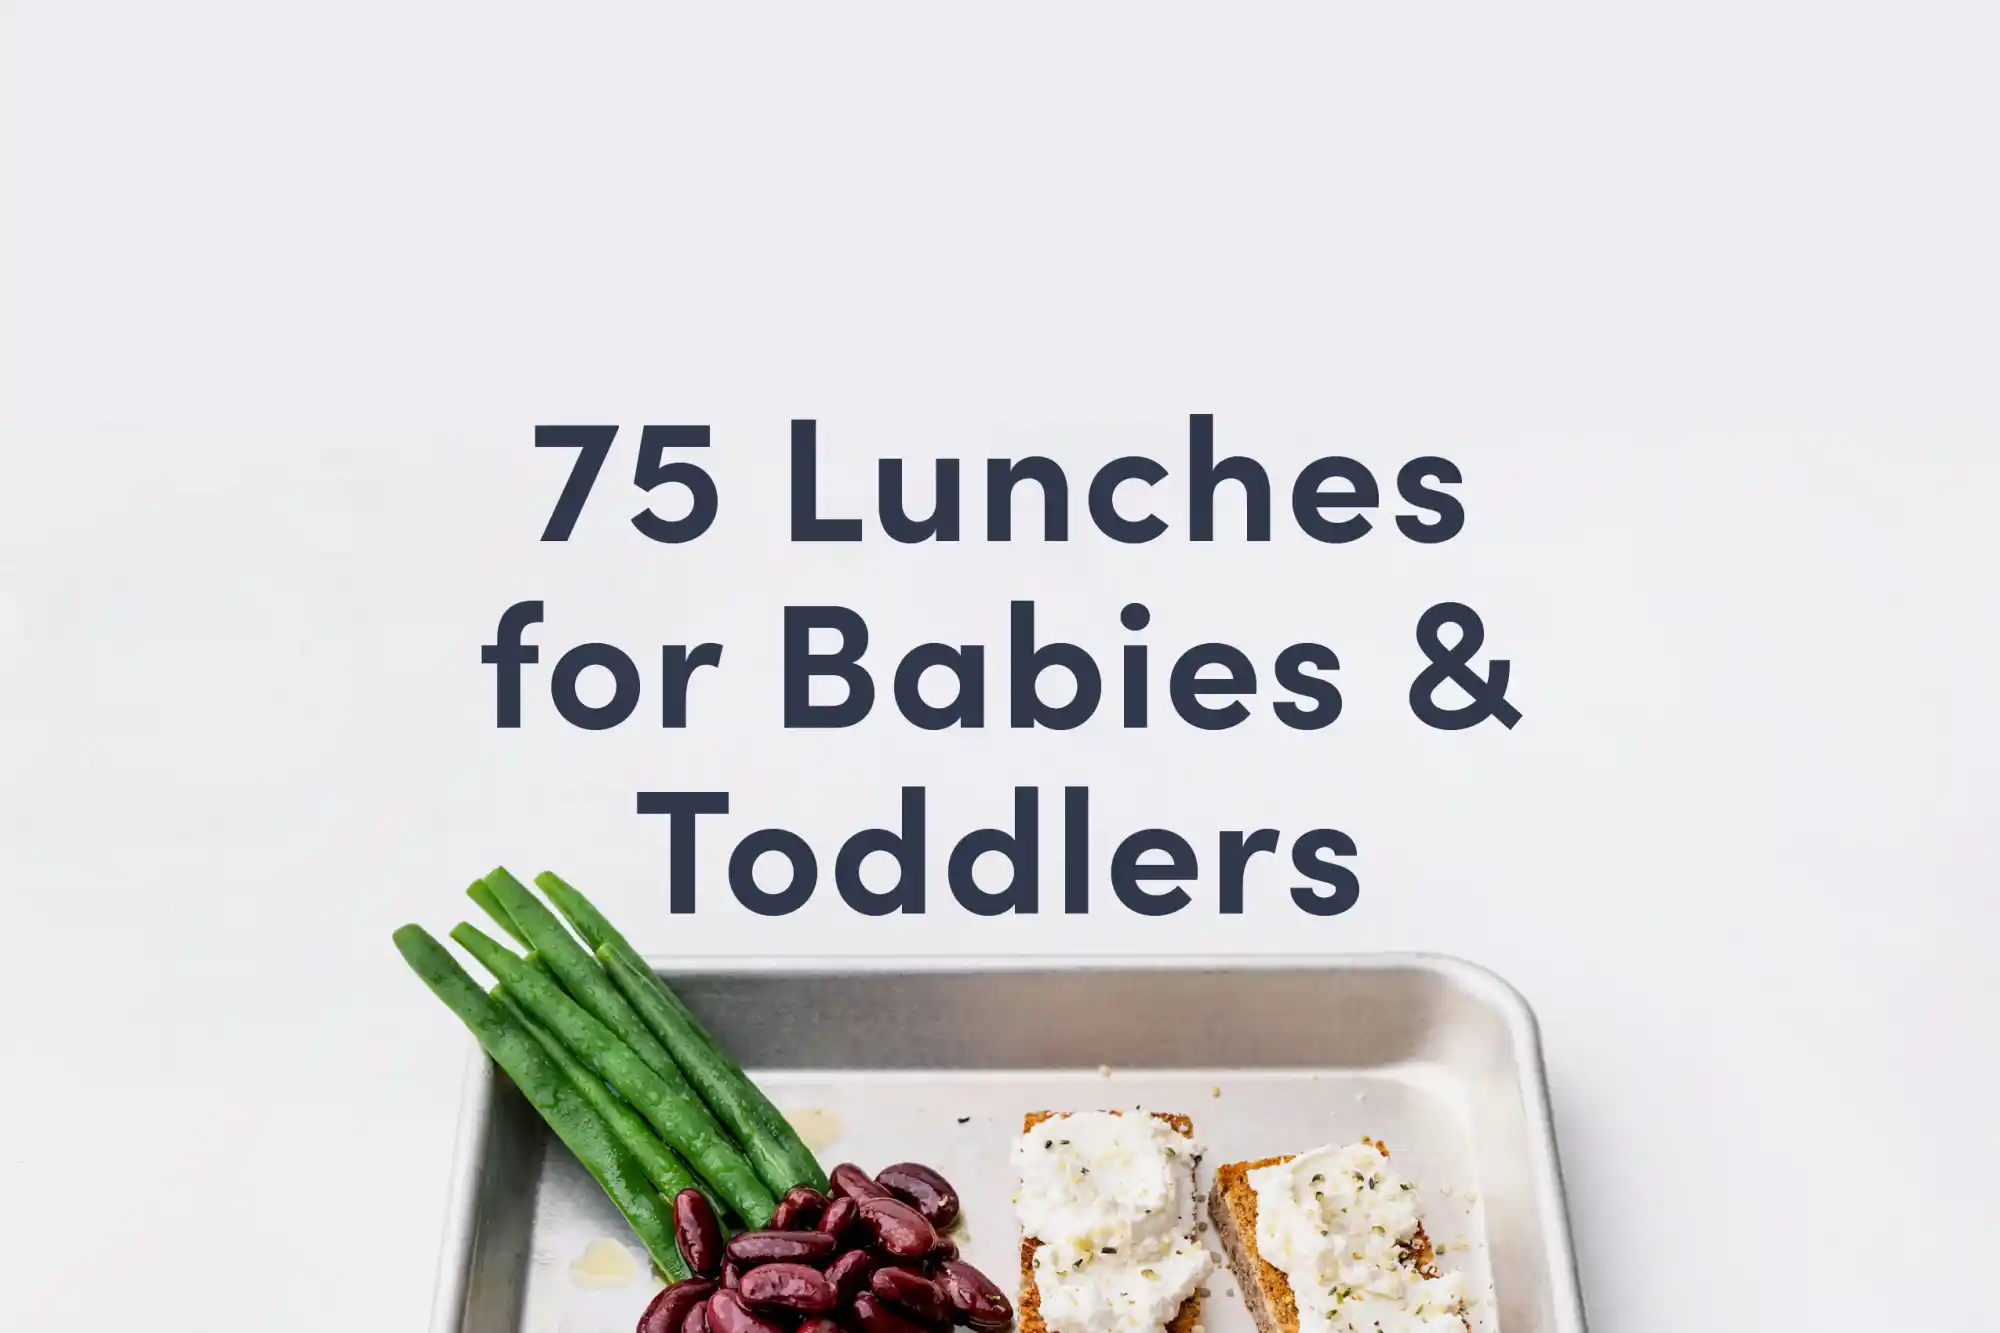 A guide cover for the Solid Starts lunch recipe book that has the heading: "75 Lunches for Babies & Toddlers" and shows a silver tray with whole string beans, kidney beans and toasts with ricotta cheese on them